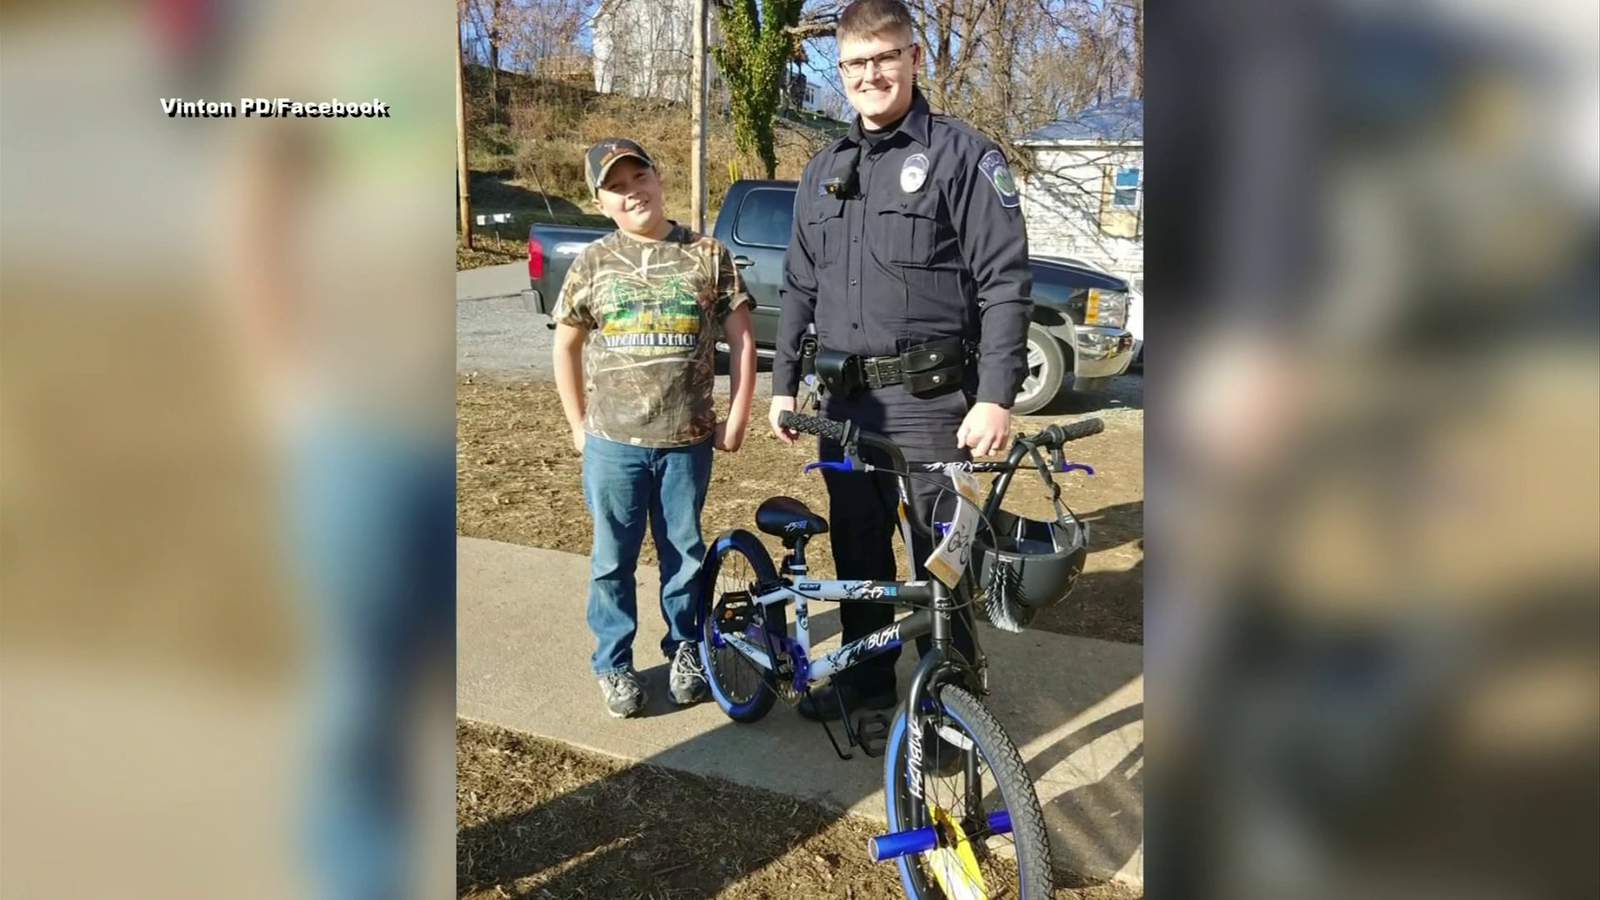 ’I thought it was pretty nice’: Vinton police officer replaces local boy’s stolen bike